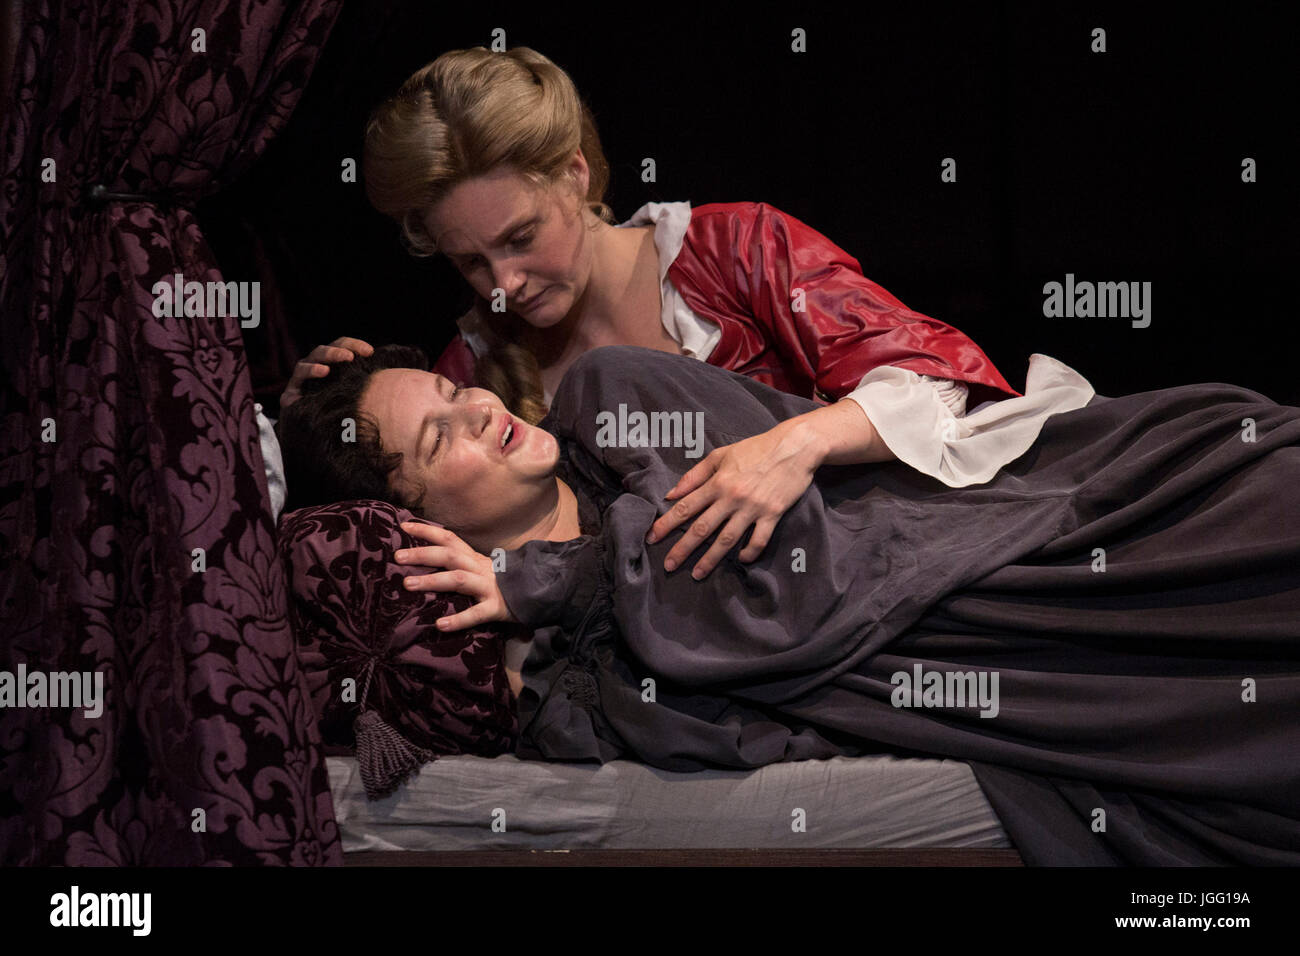 London, UK. 6th July, 2017. L-R: Emma Cunniffe and Romola Garai. After a sold out run at the Swan Theatre in Stratford-upon-Avon in 2015-16, the Royal Shakespeare Company production of Queen Anne transfers to the Theatre Royal Haymarket from 30 June for a thirteen week limited run until 30 September 2017. Queen Anne is a new play written by Helen Edmundson and directed by Natalie Abrahami. With Emma Cunniffe as Queen Anne/Princess Anne, Romola Garai as Sarah Churchill/Duchess of Marlborough. Credit: Bettina Strenske/Alamy Live News Stock Photo